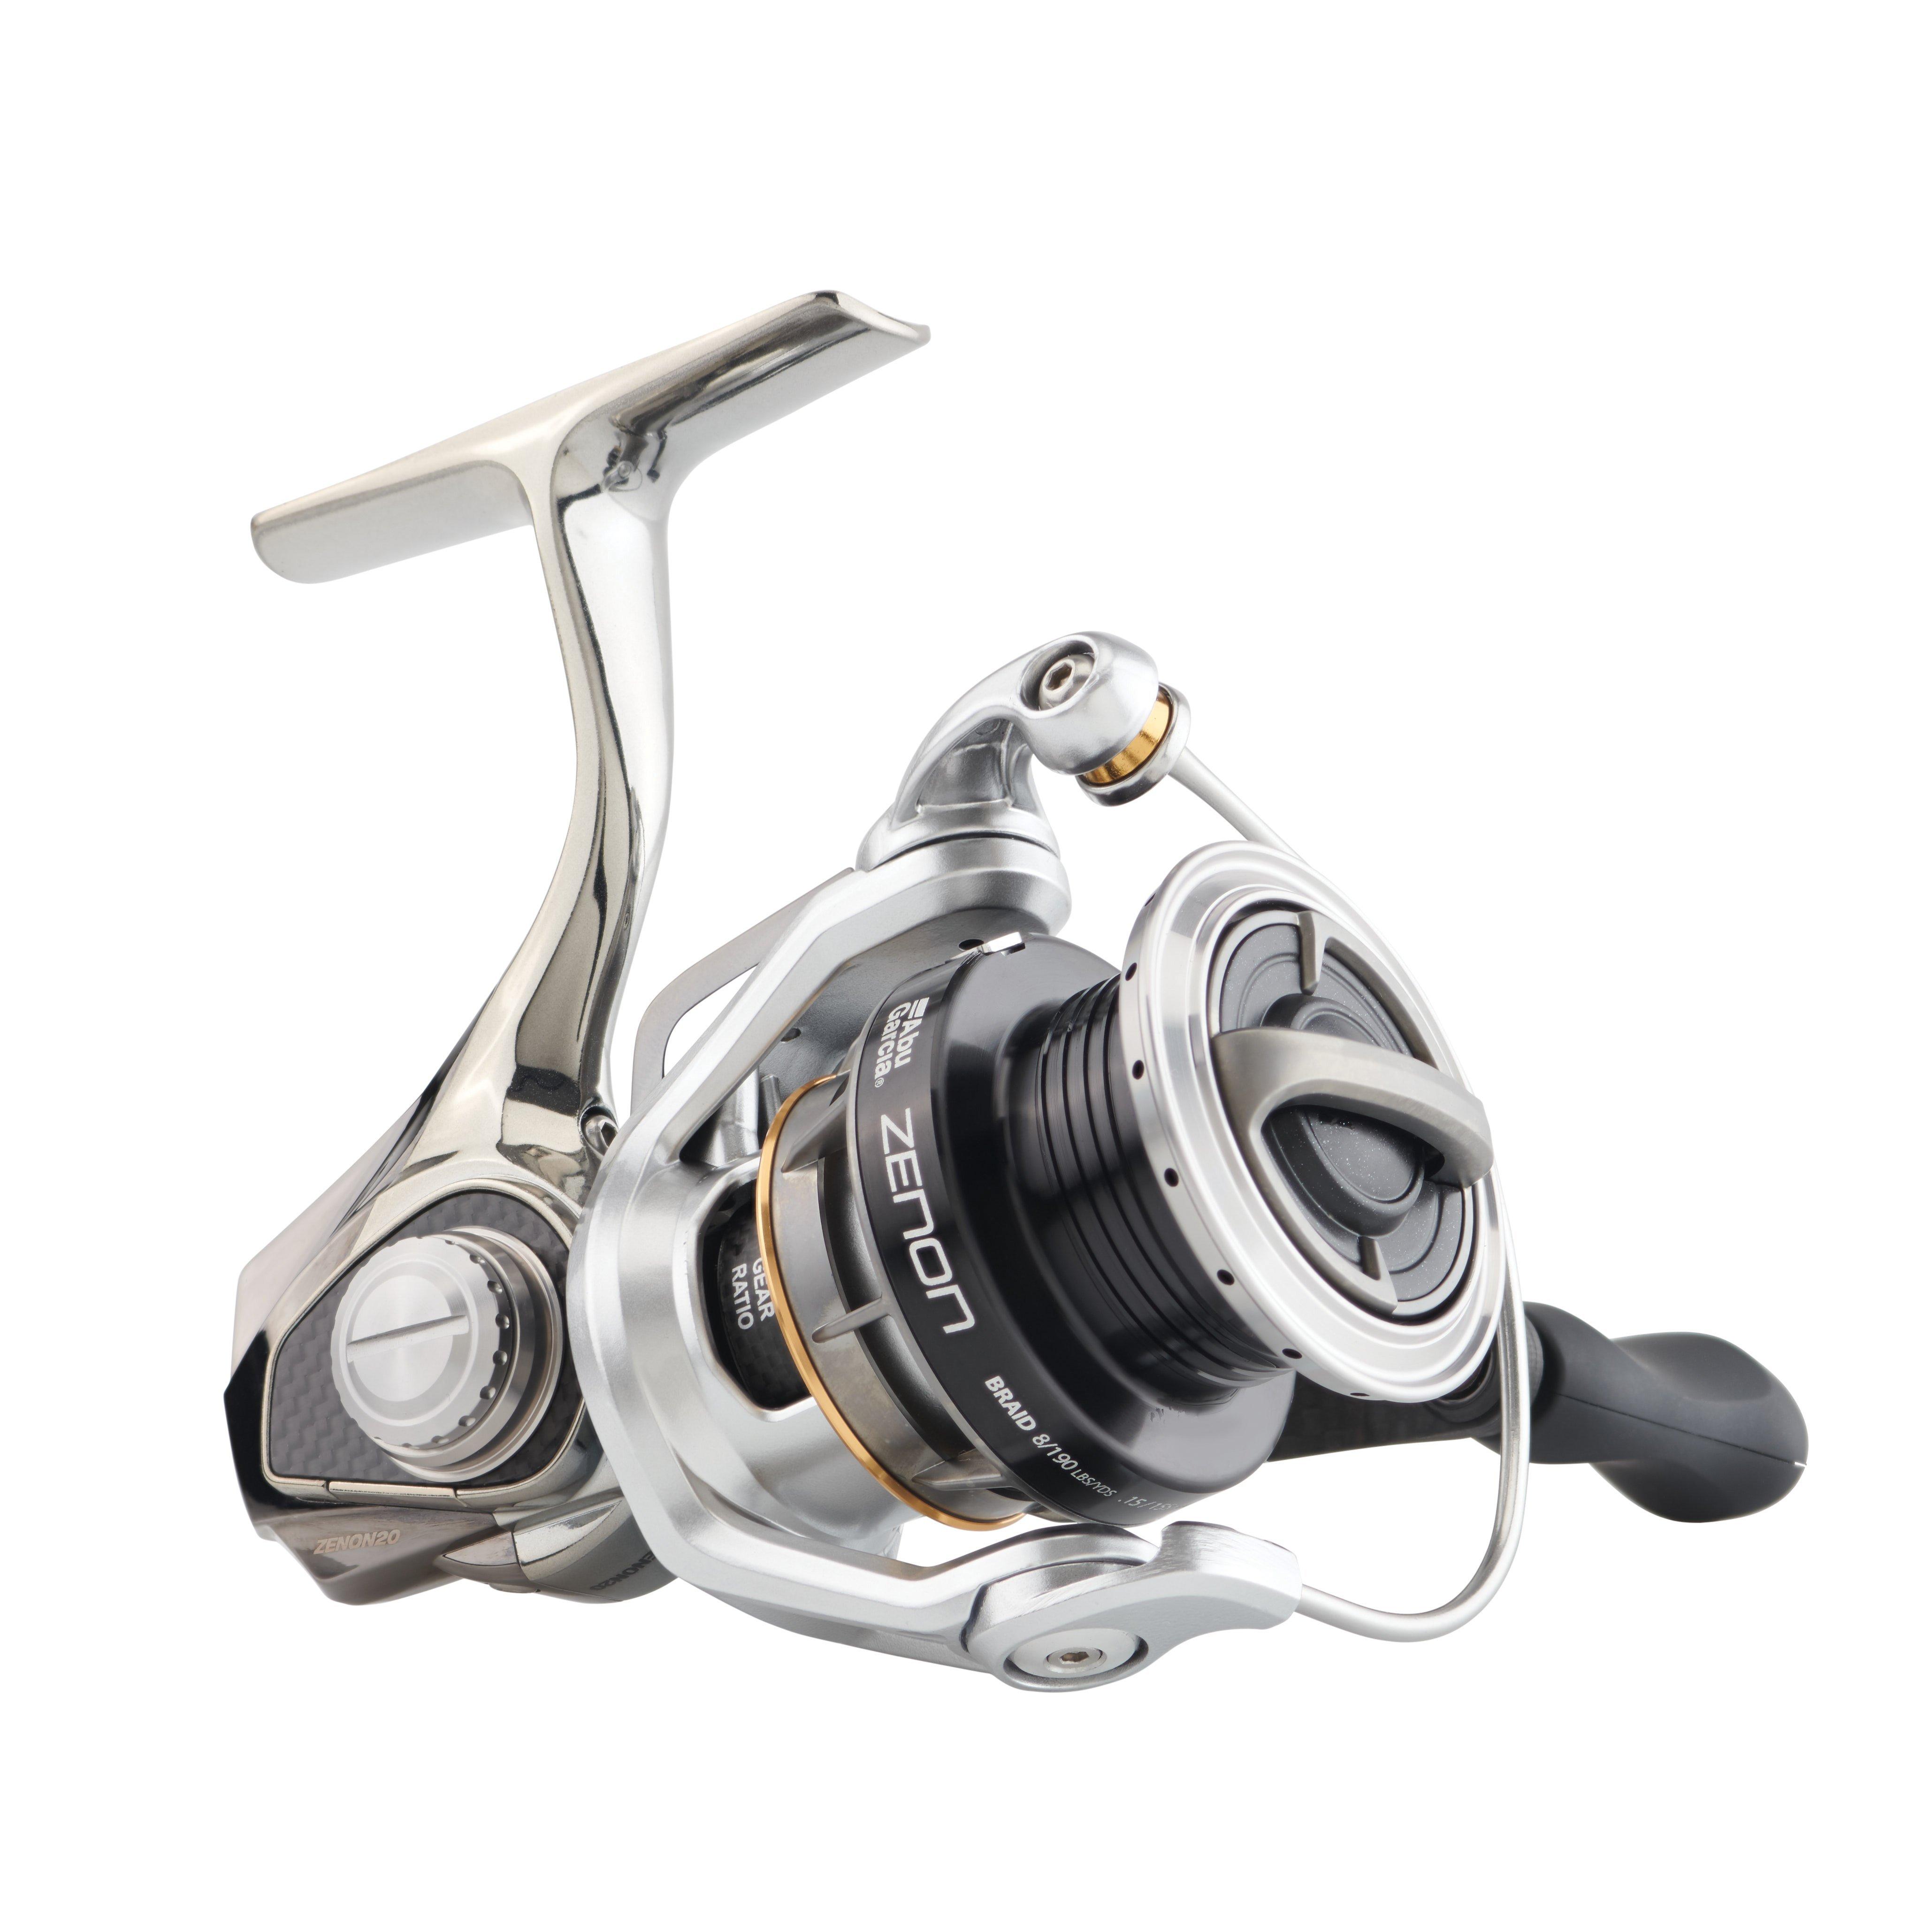 Abu Garcia - NOW AVAILABLE! The Abu Garcia ZATA low profile reel,  performance taken to the next level. Spinning reels and combos coming soon!